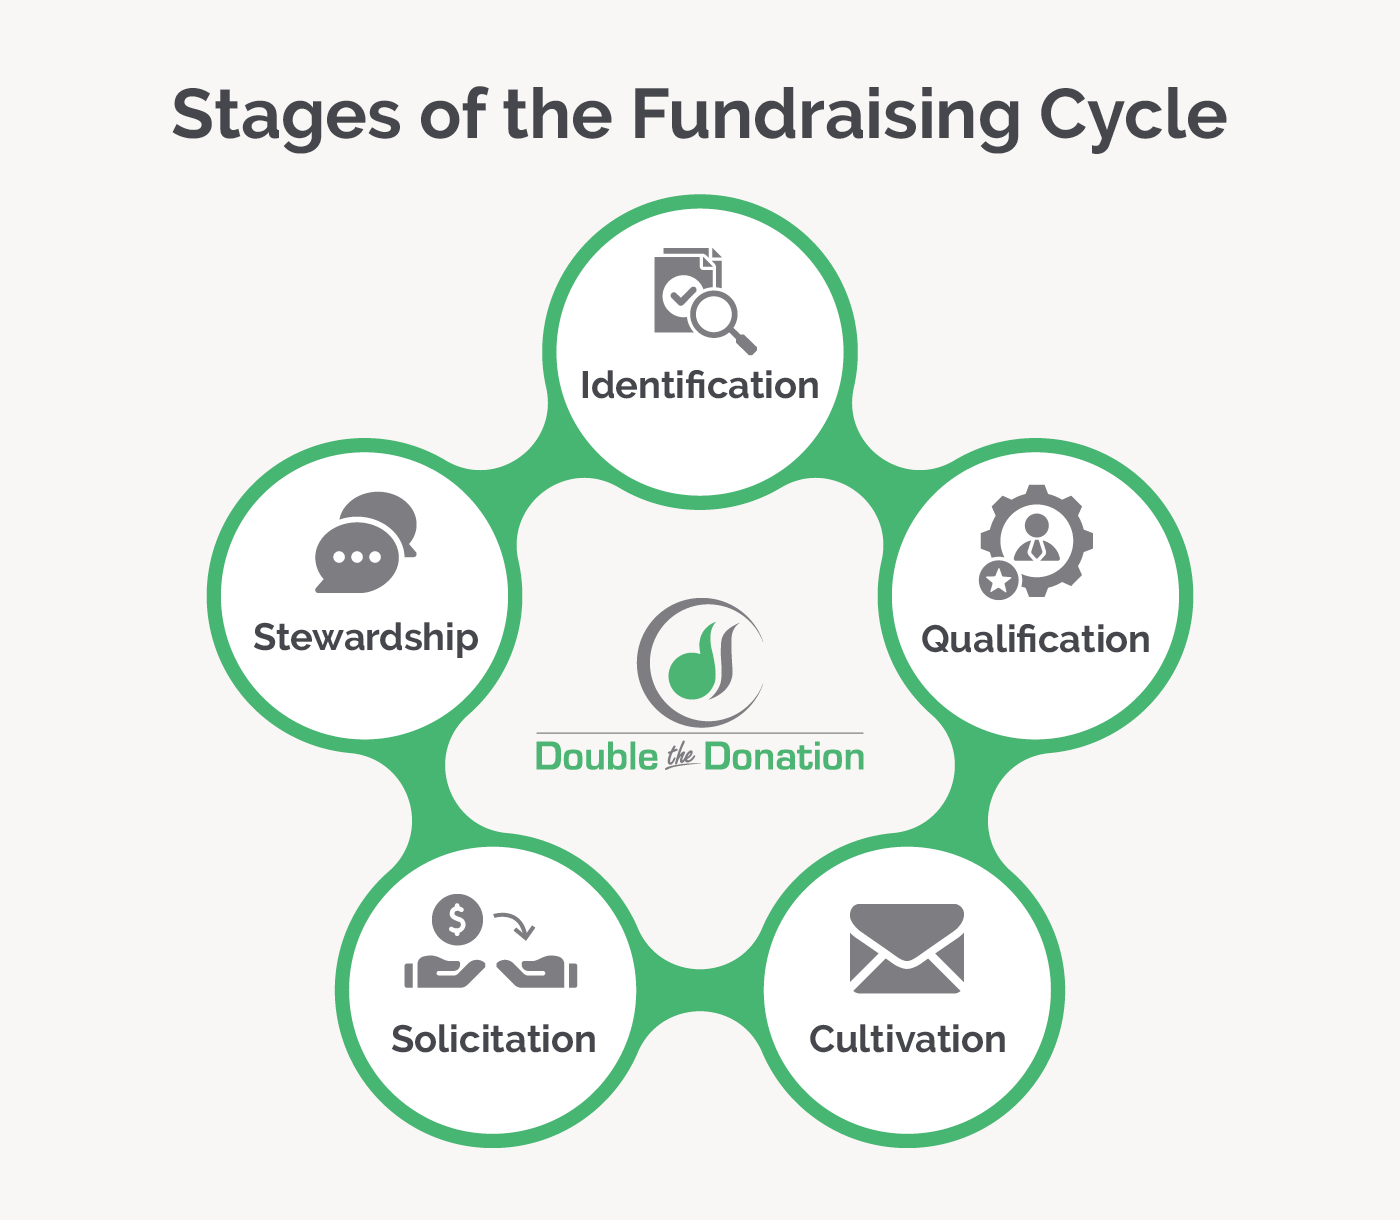 The fundraising cycle (as explained below)